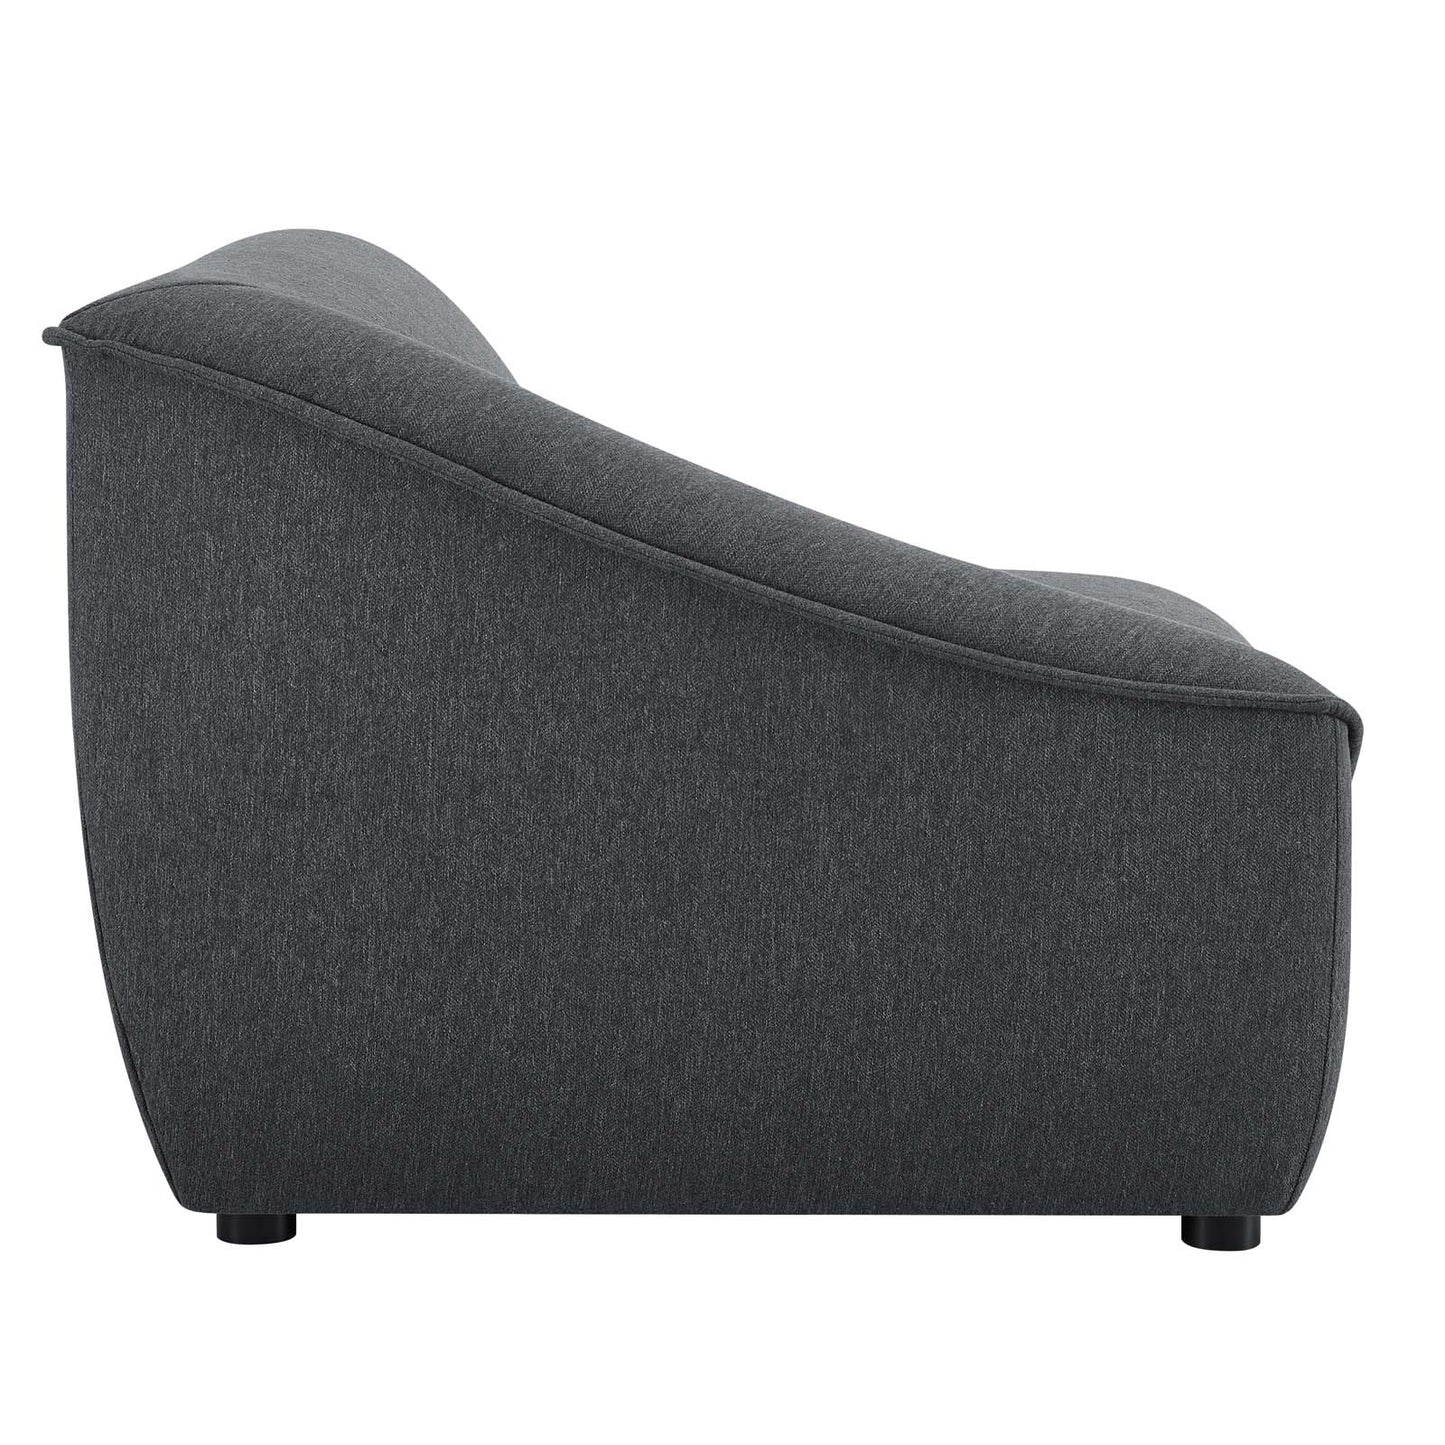 Comprise Left-Arm Sectional Sofa Chair Charcoal EEI-4415-CHA